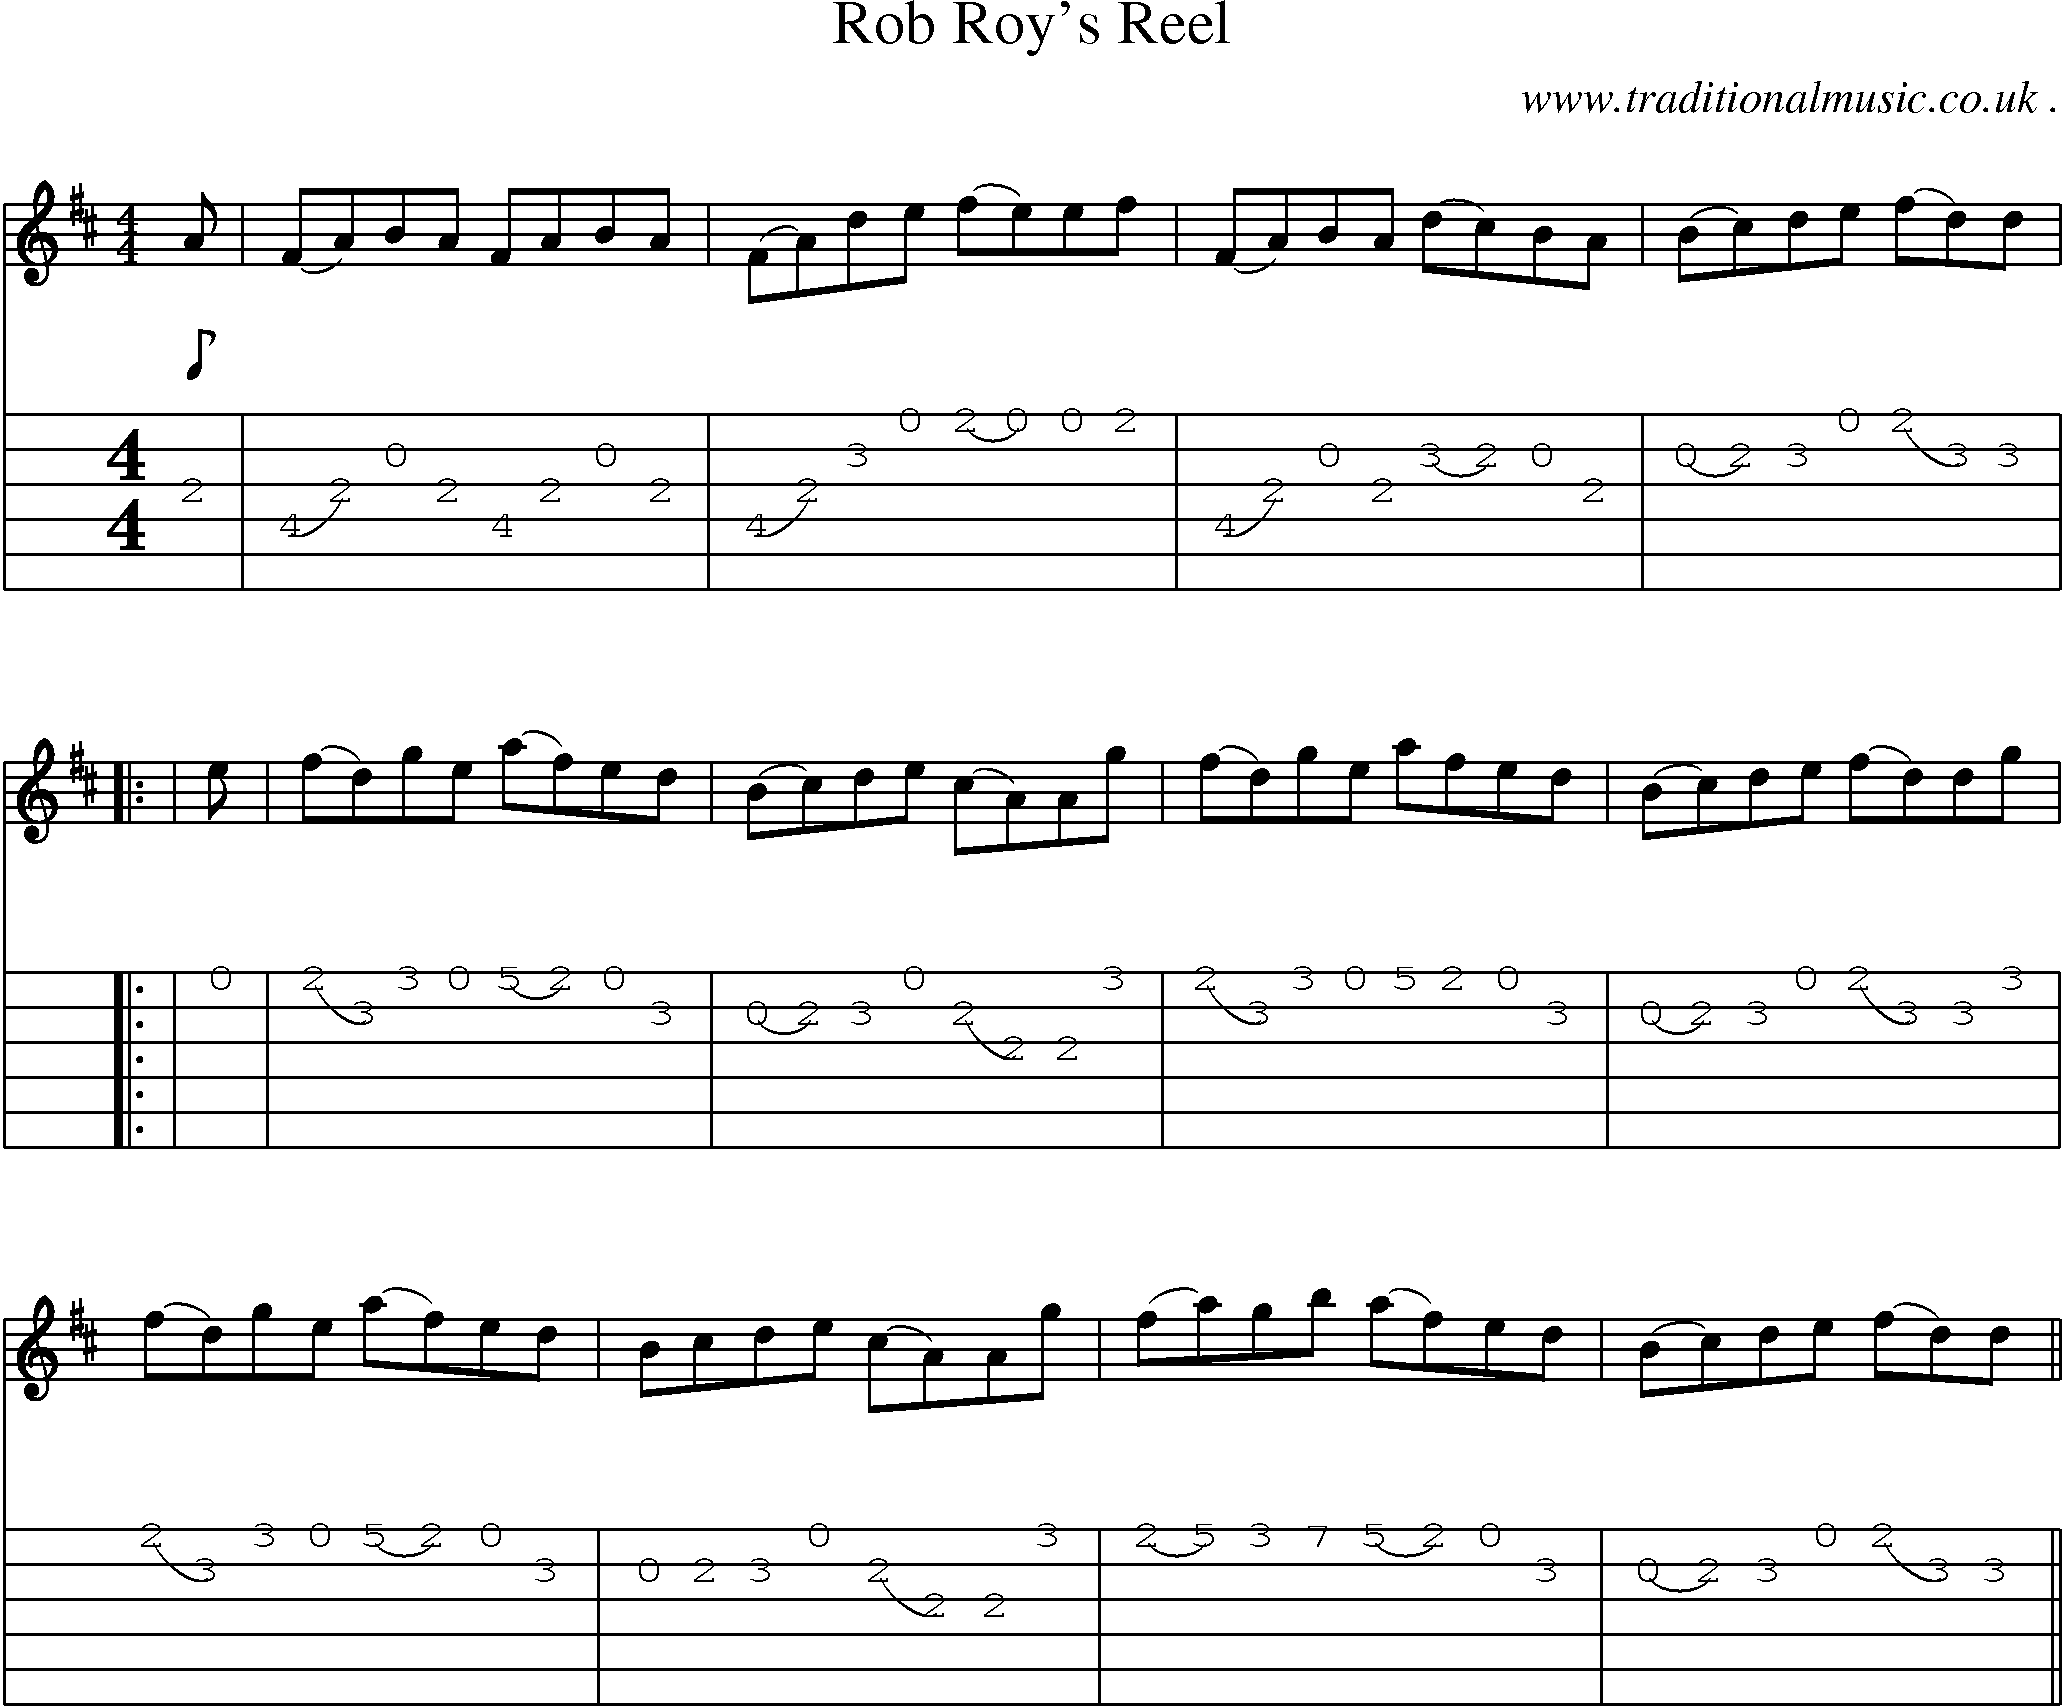 Sheet-Music and Guitar Tabs for Rob Roys Reel